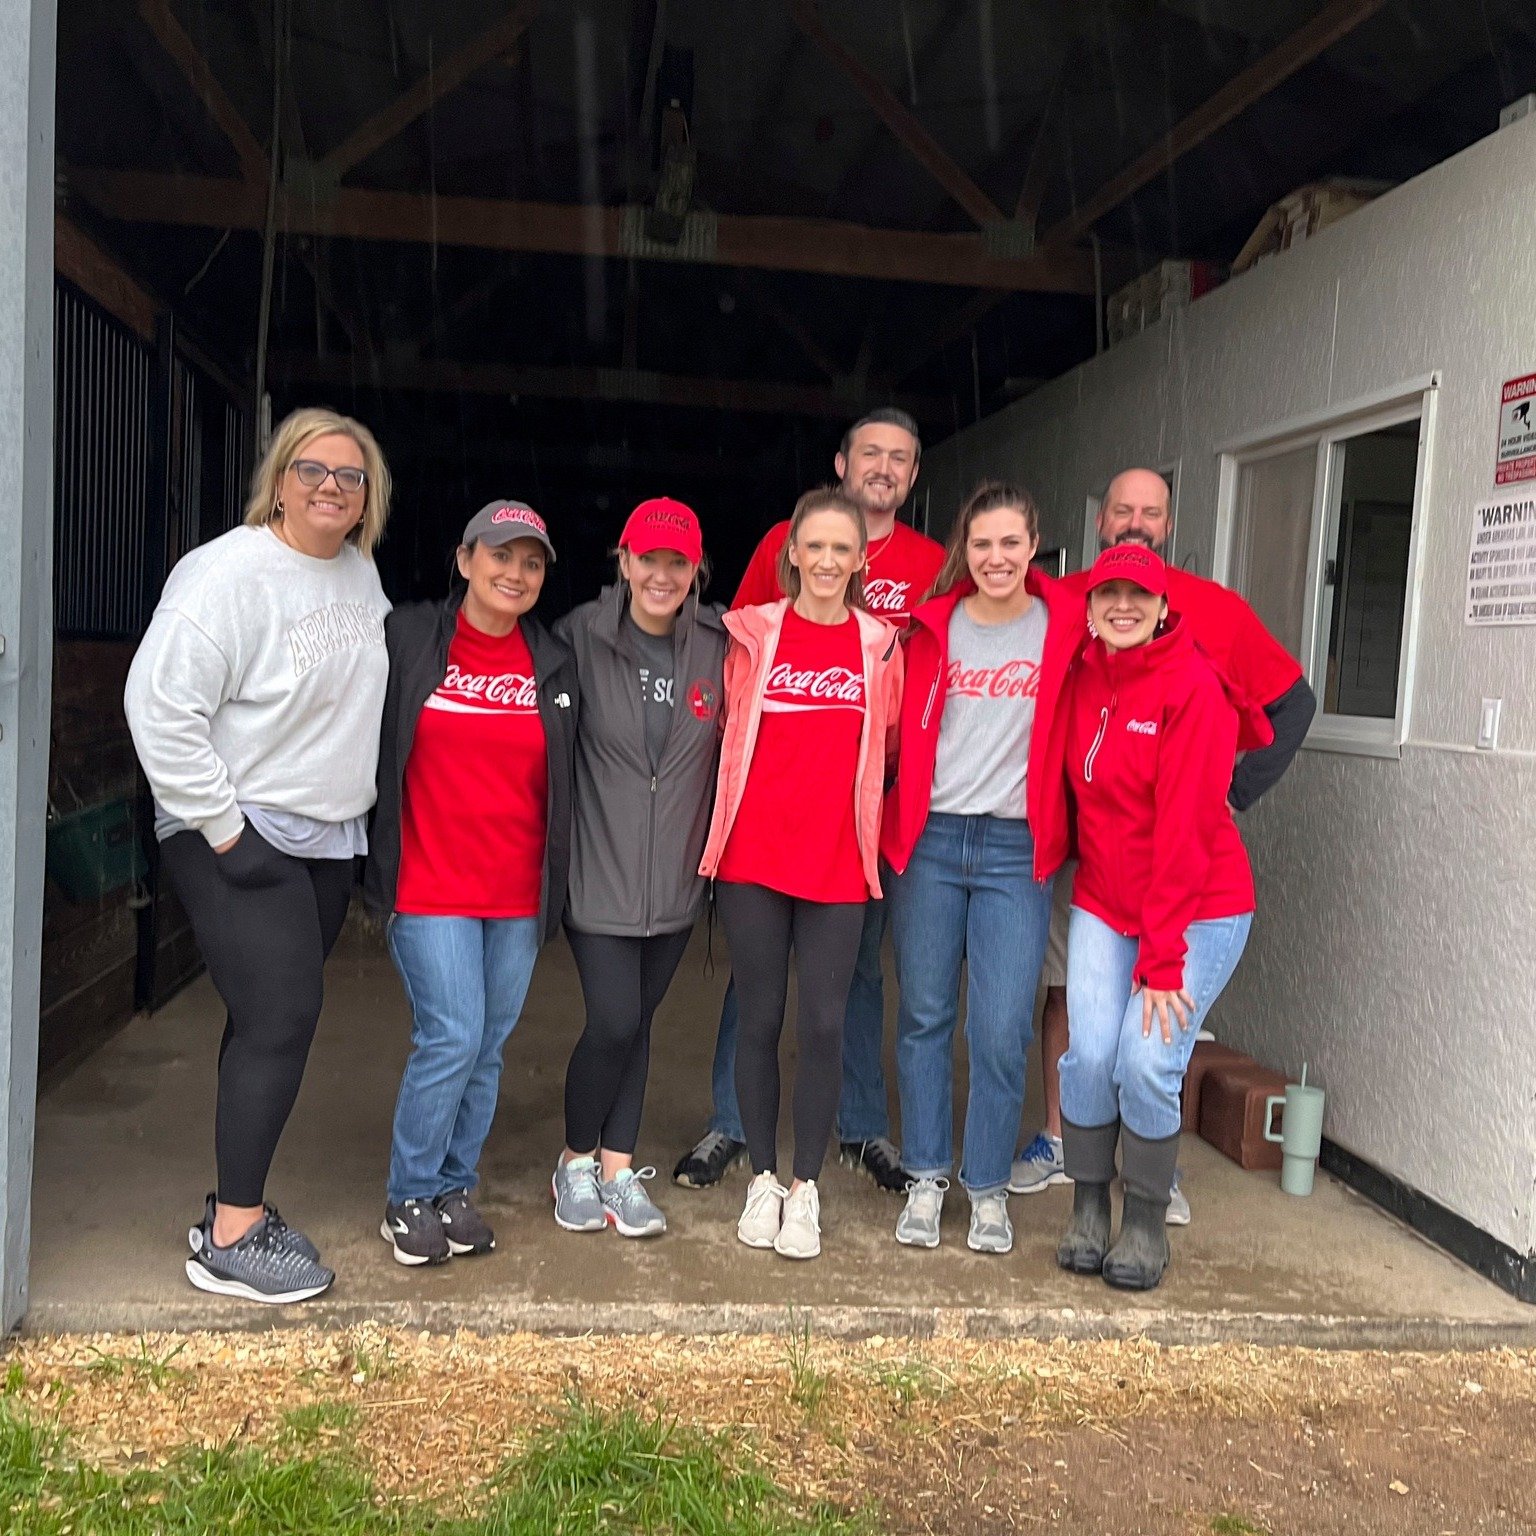 Friends, we want to say a BIG thank you to the Coca-Cola Company, who joined us for a work day at Grace Farms! The Coca-Cola company has been with us since the beginning&mdash;when Saving Grace was founded in 2009!

We are grateful for the numerous w